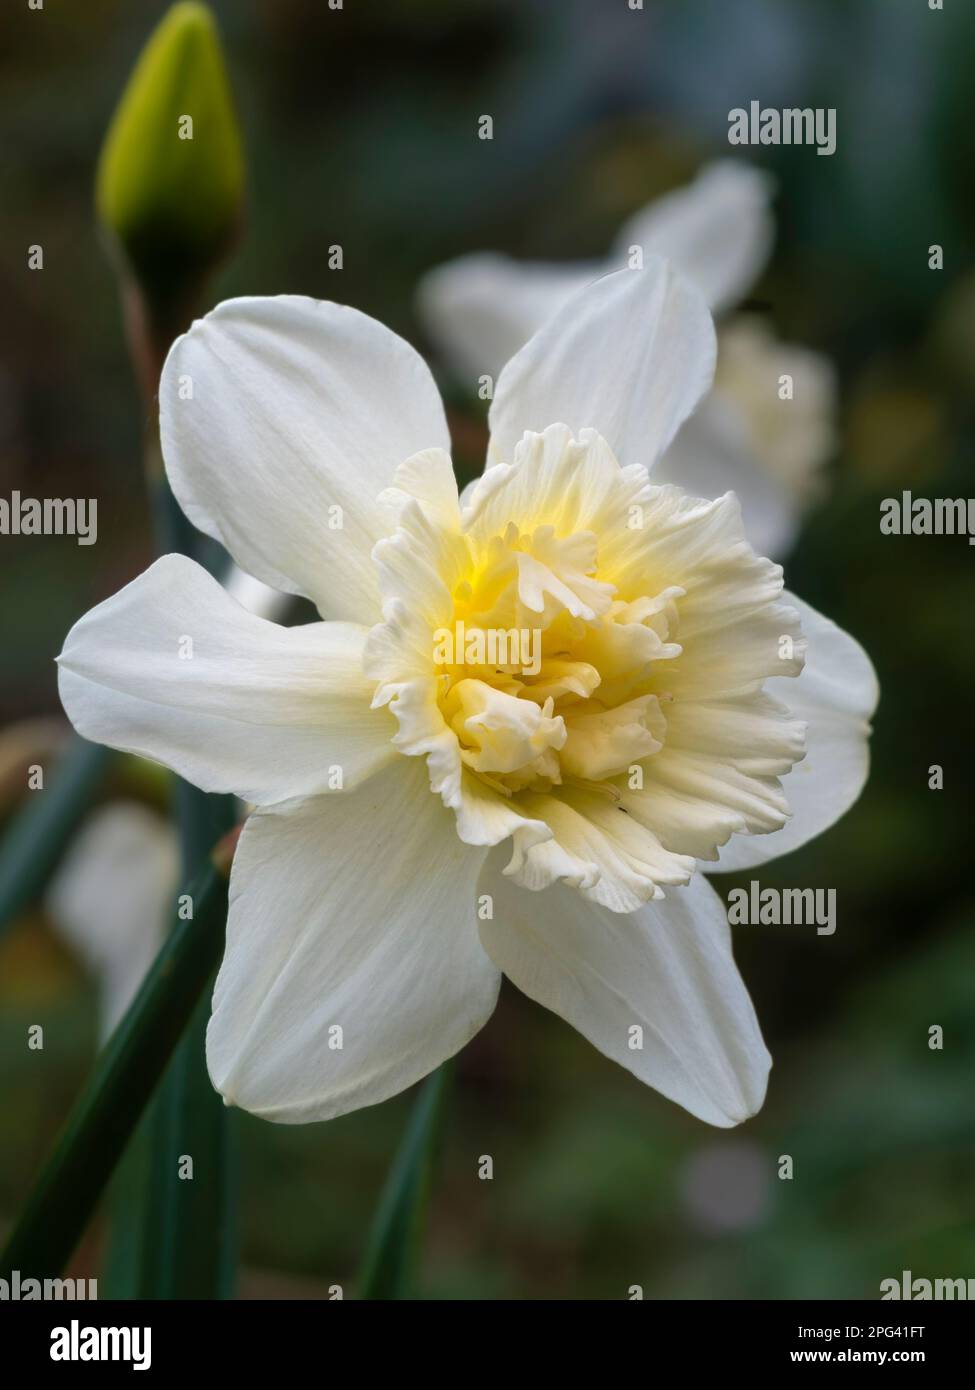 Early spring flowering daffodil, Narcissus 'Ice King' with double, ruffled cup and white outer petals Stock Photo